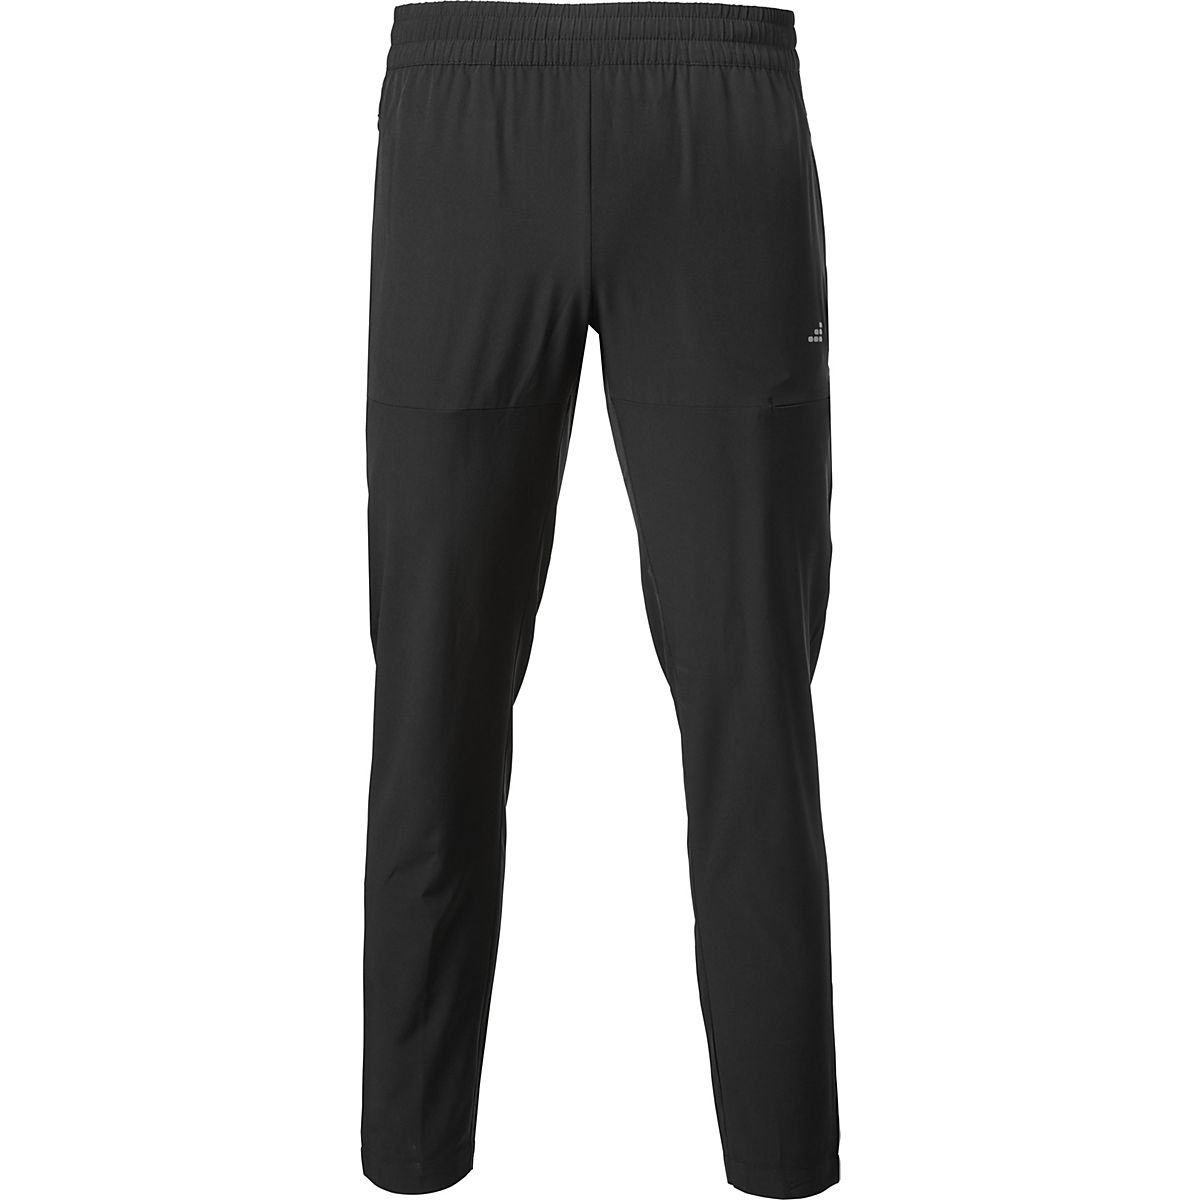 BCG Men's Stretch Tapered Training Pants Academy